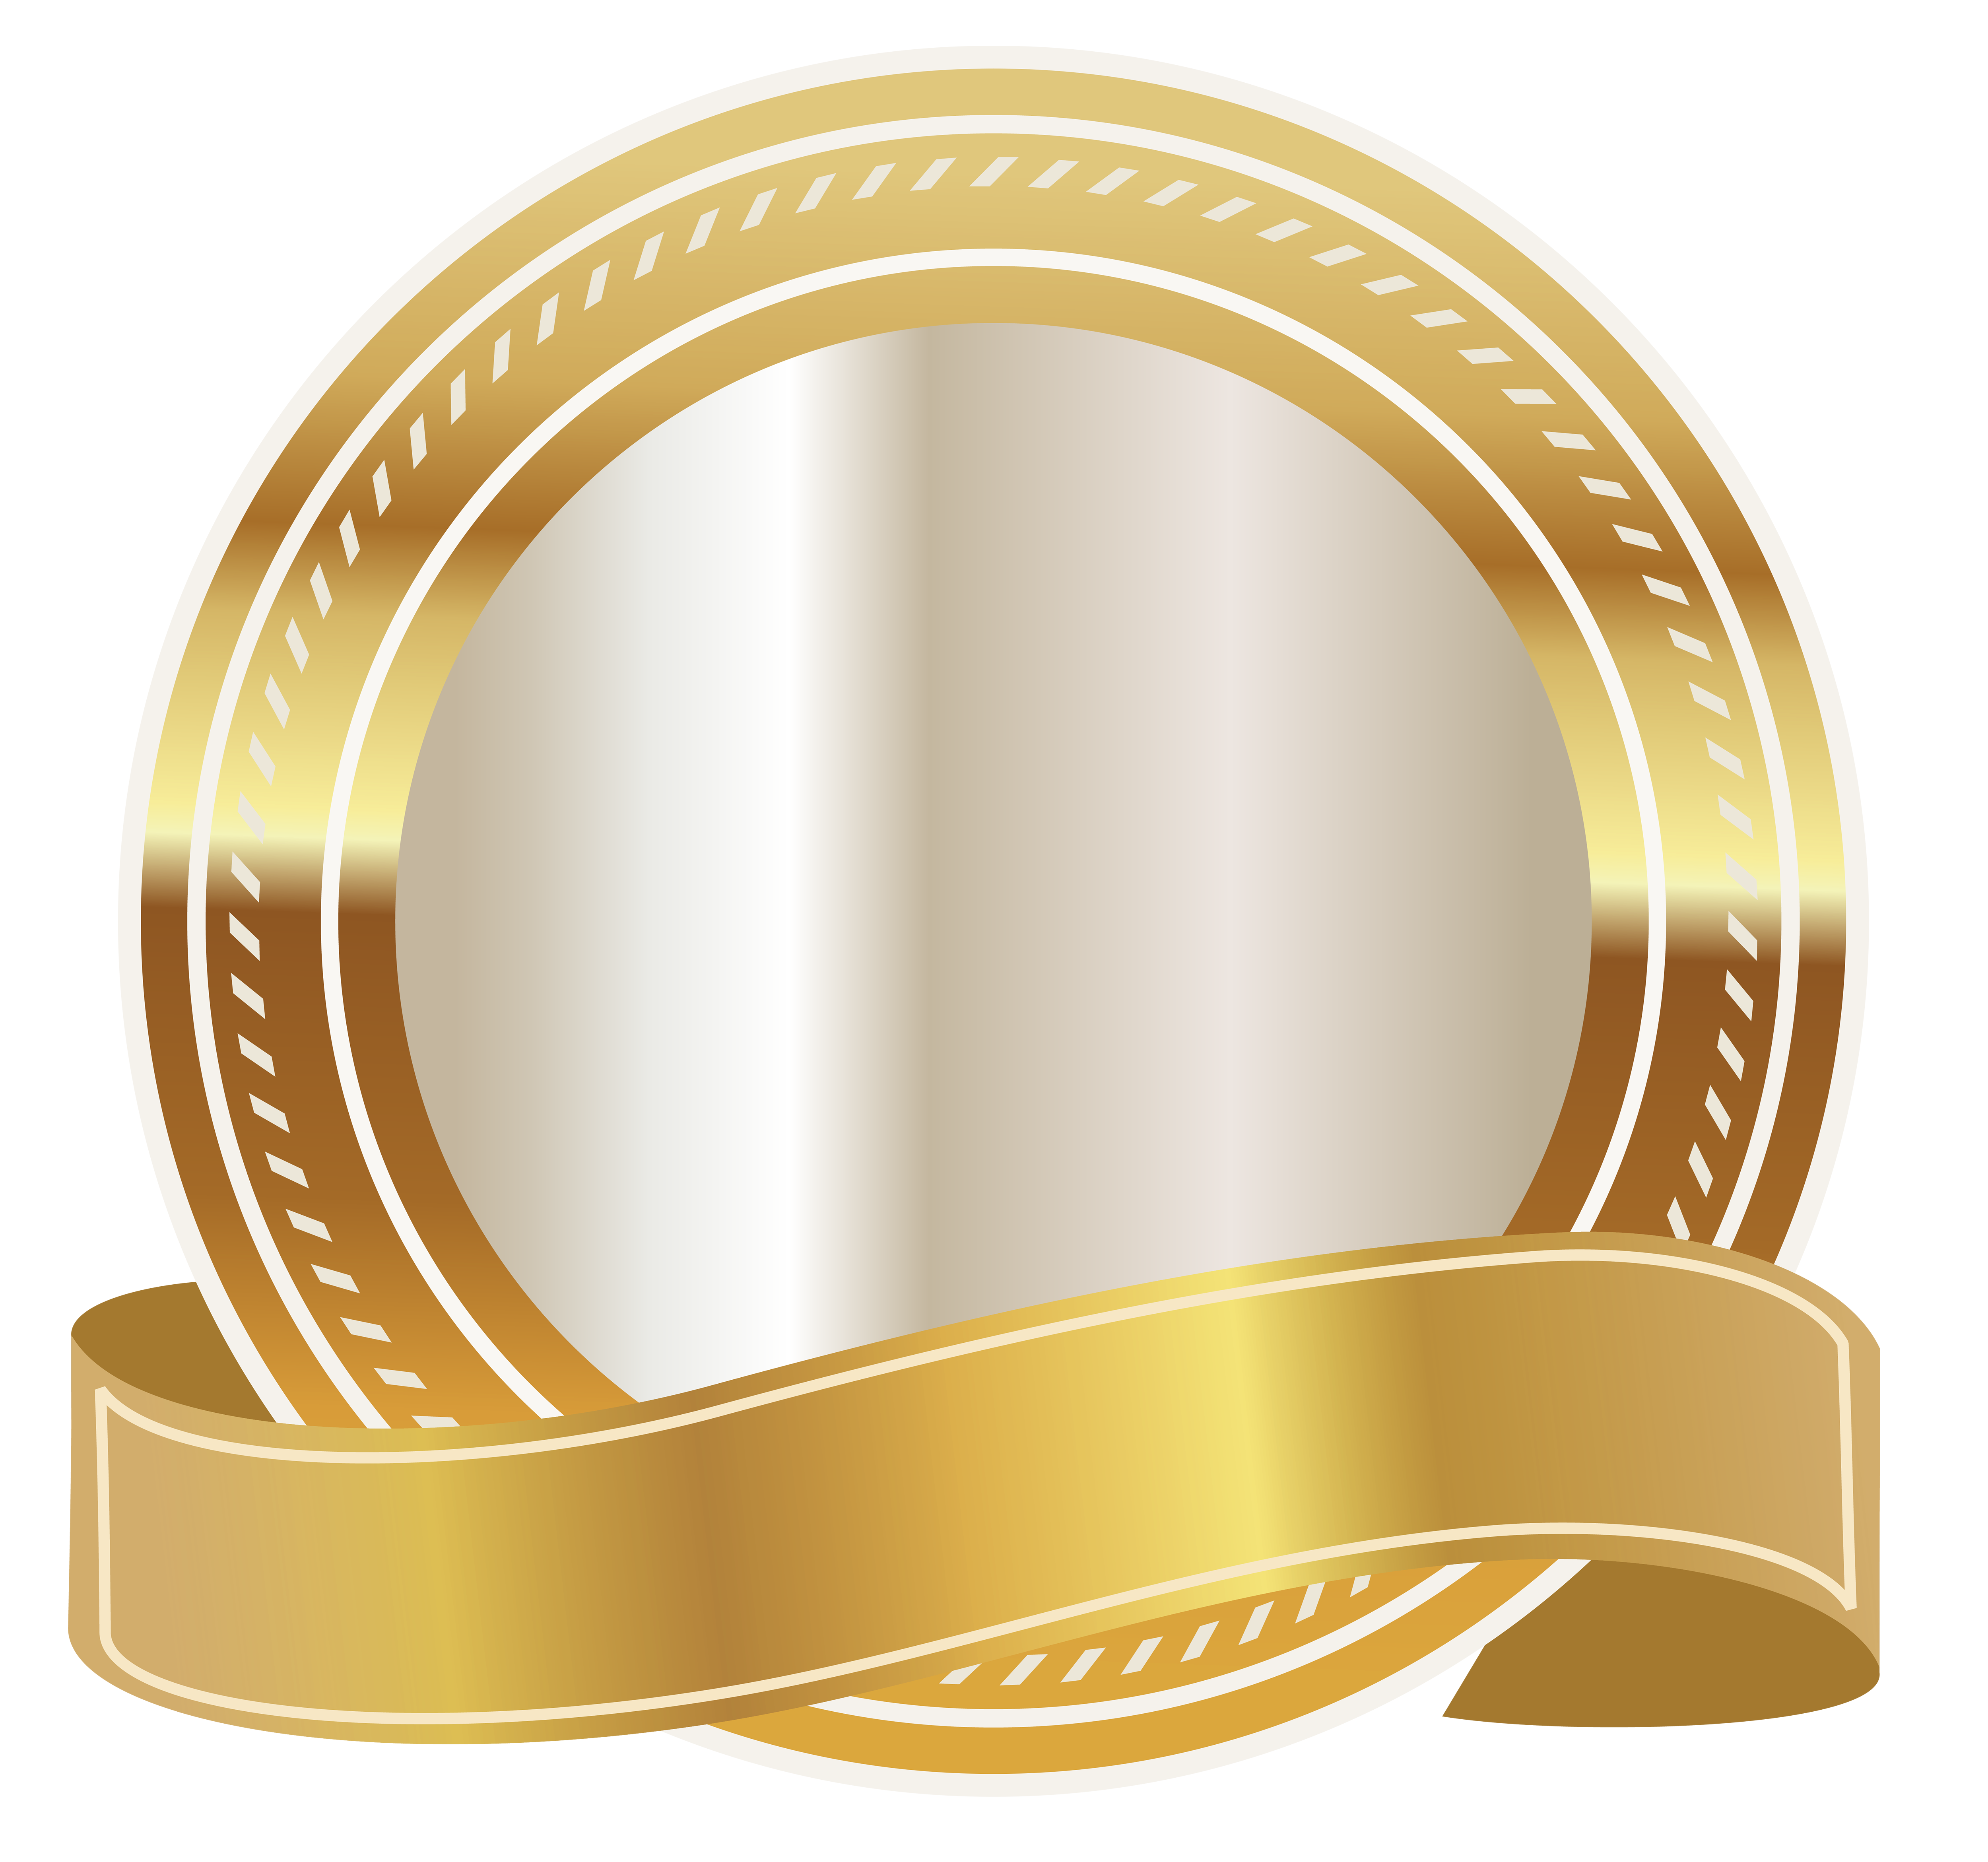 Gold seal with png. Dad clipart ribbon